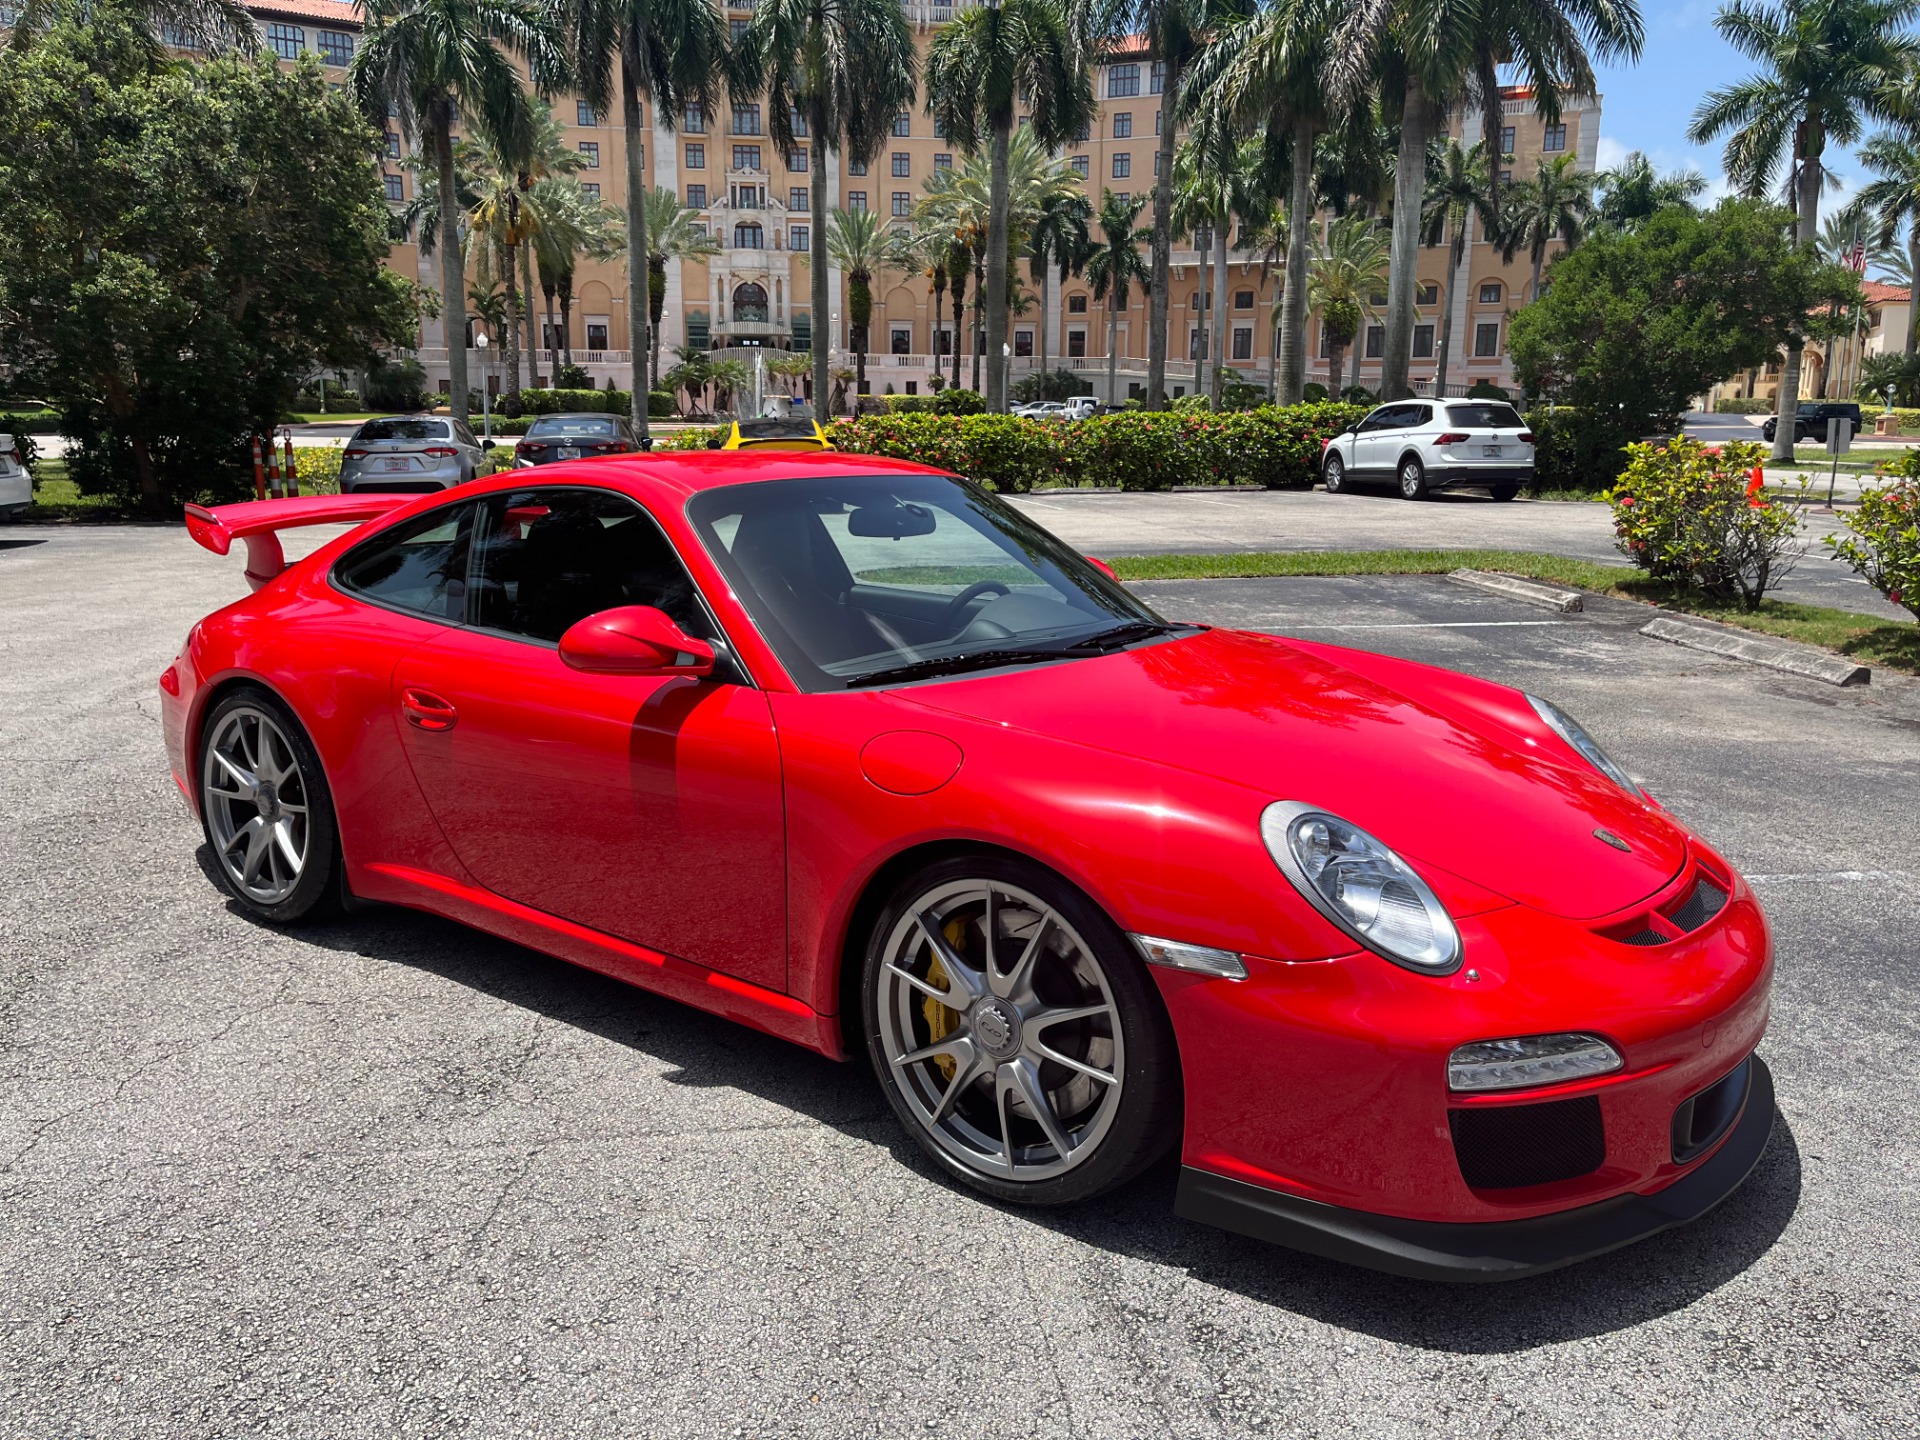 Used 2010 Porsche 911 GT3 for sale $179,850 at The Gables Sports Cars in Miami FL 33146 2